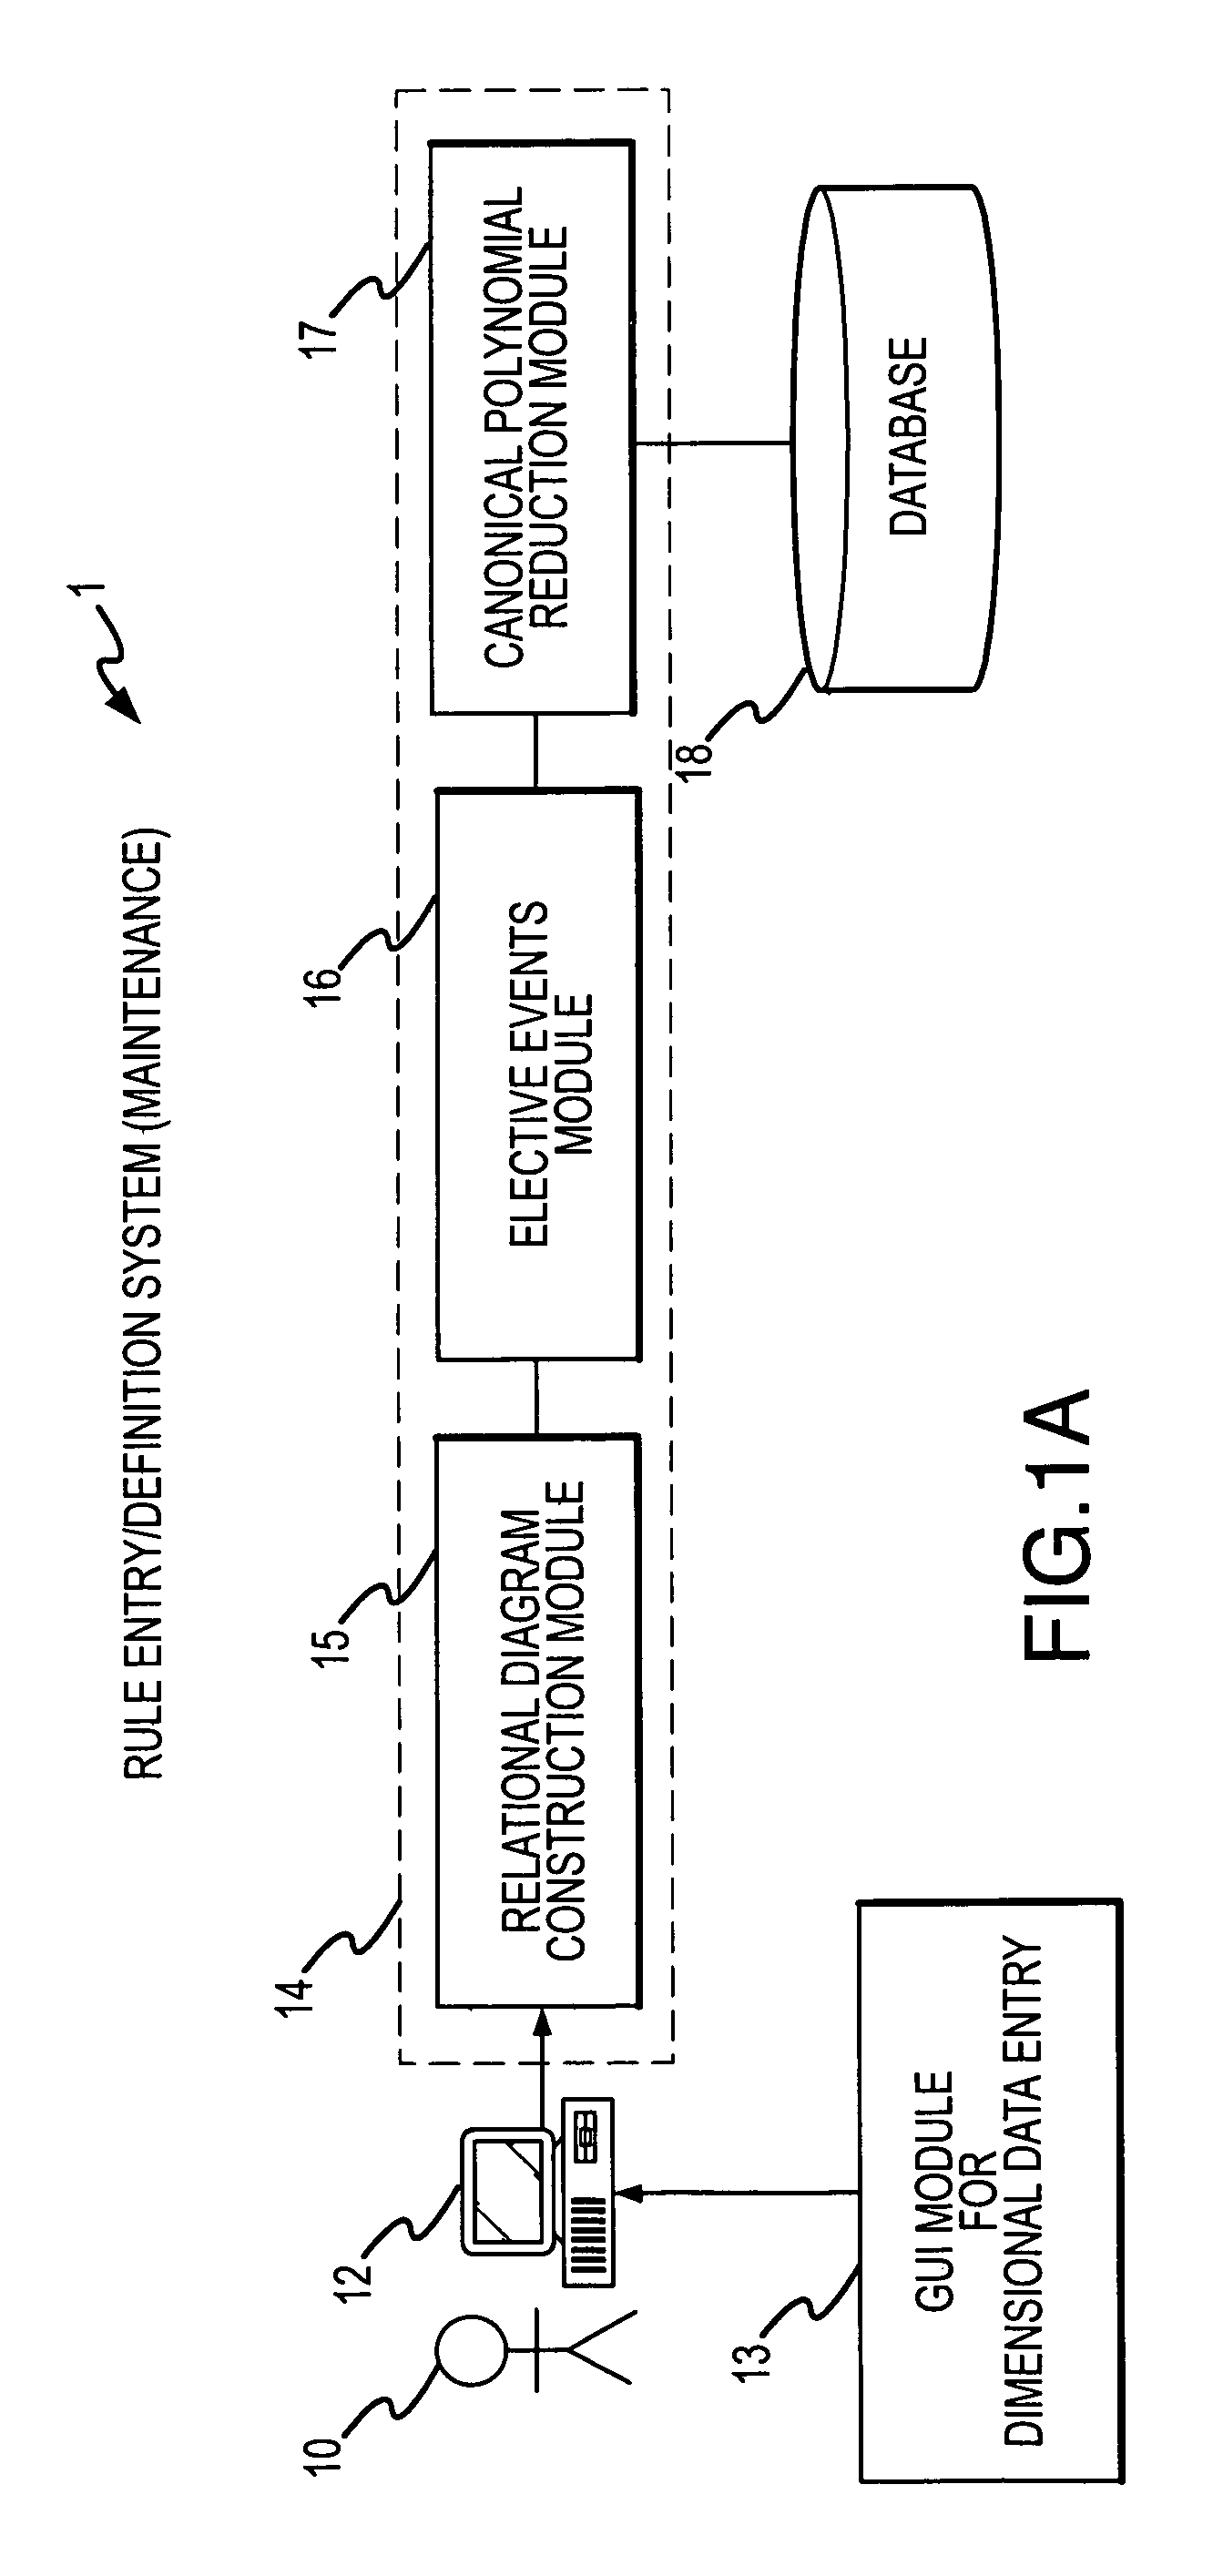 Method and apparatus using automated rule processing to configure a product or service